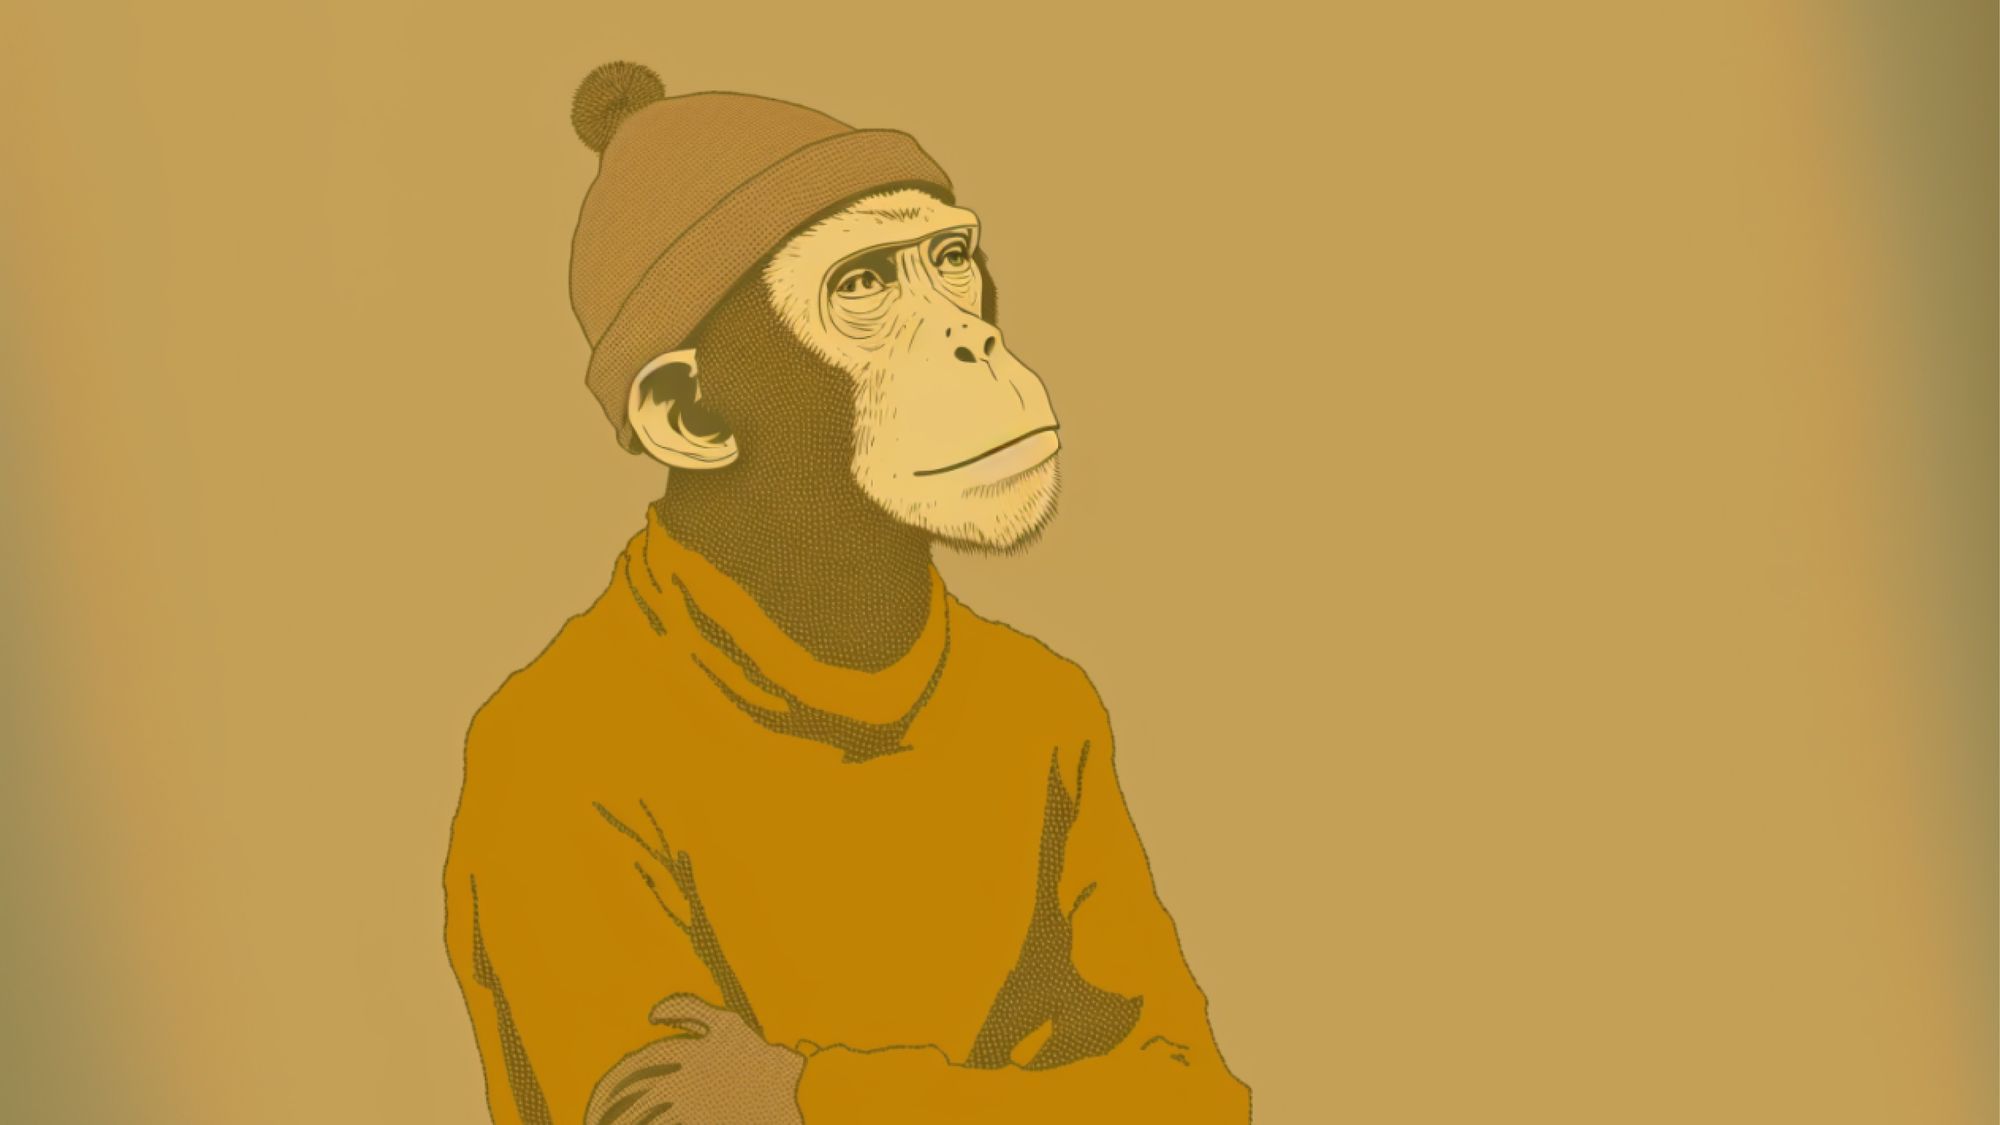 An Image of a monkey in a thinking pose dressed as an artist